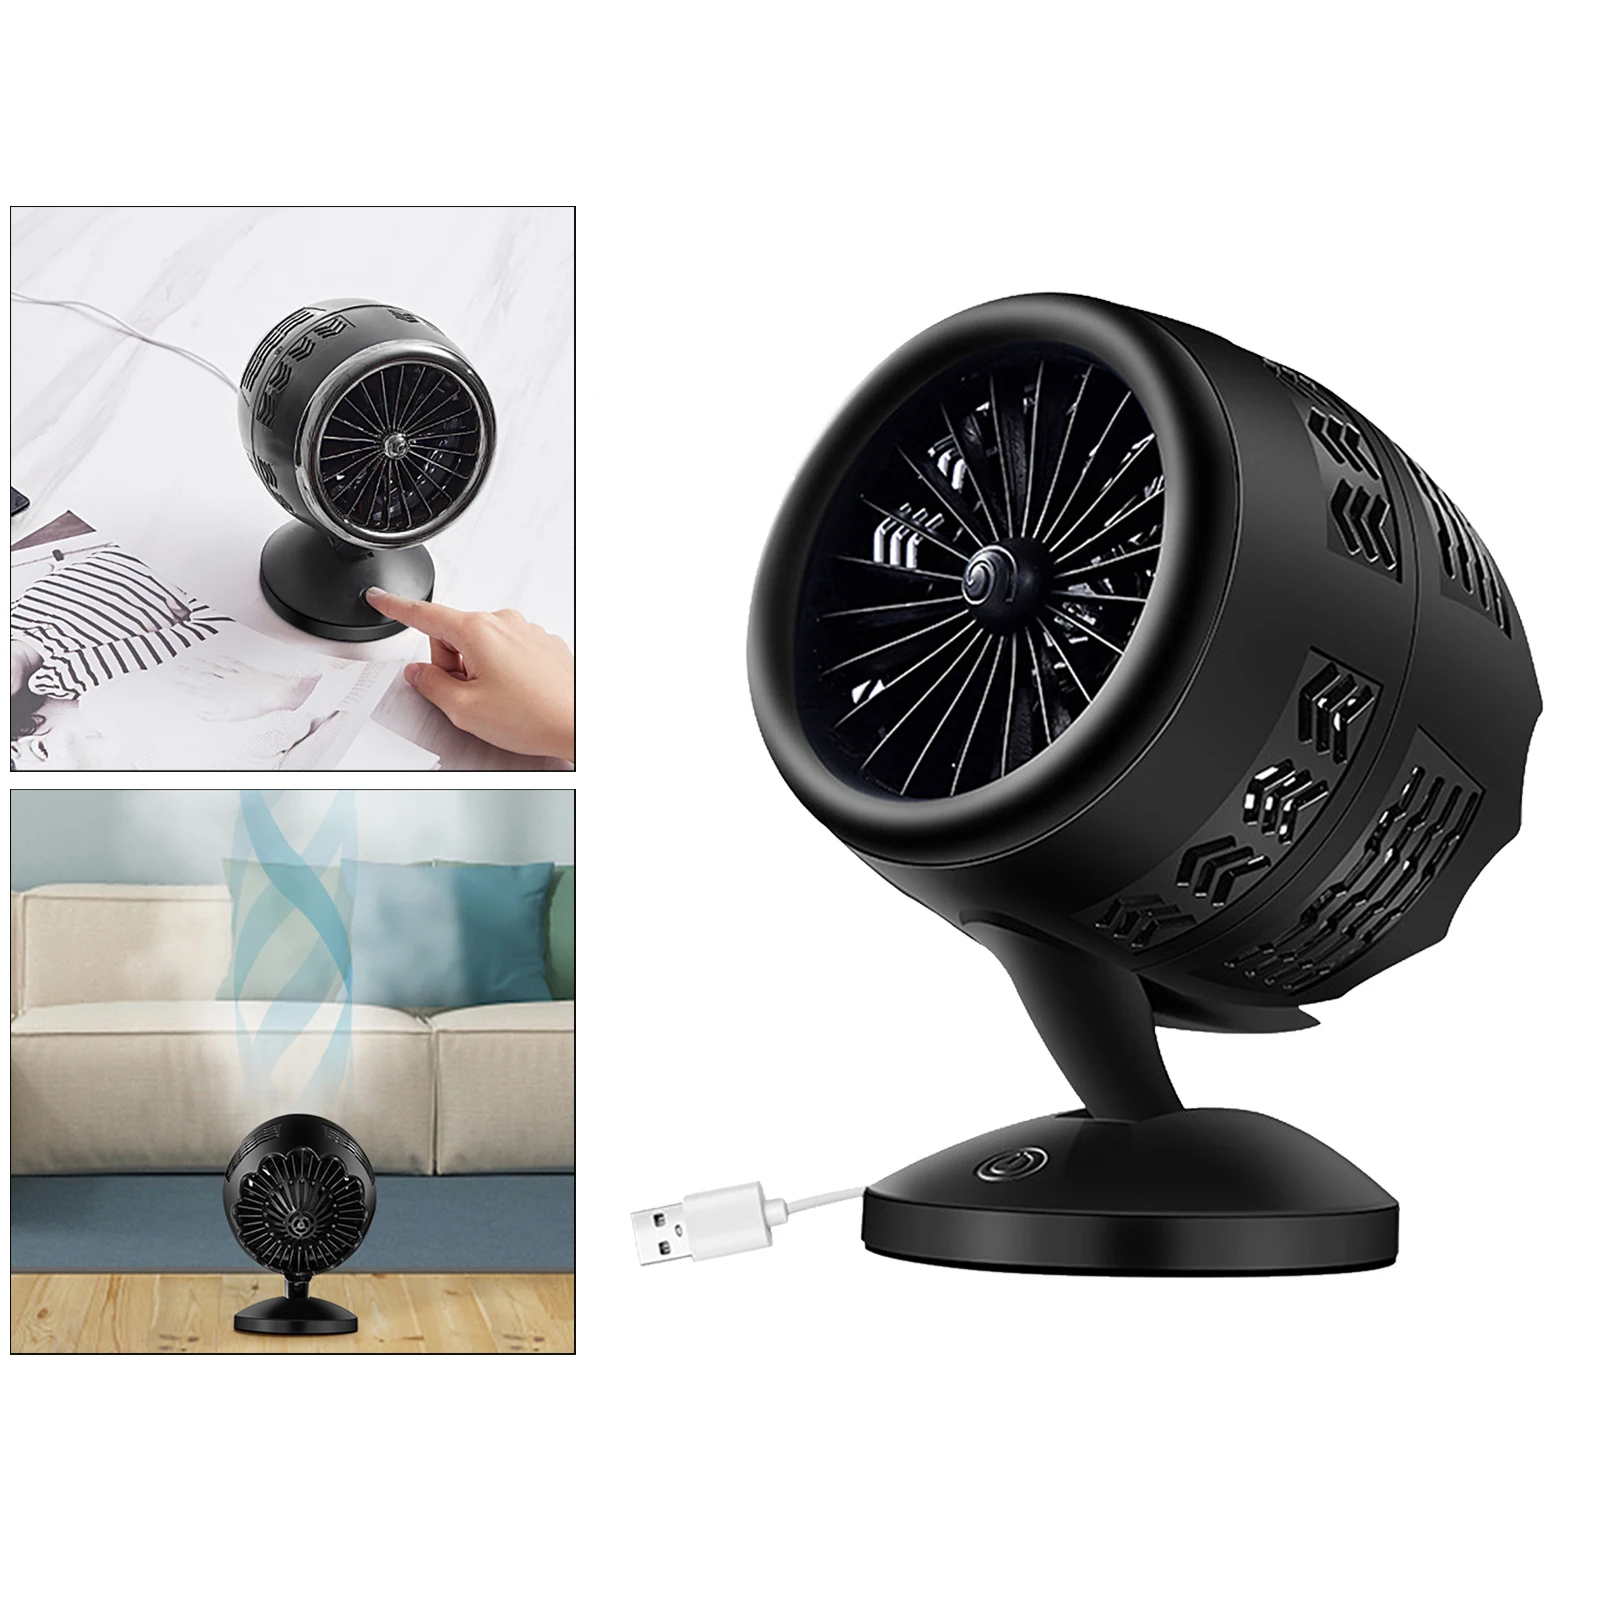 Portable Table Desk Fan Cooling Fan Twin Turbo Blades Air Circulating Technology Mute soft wind for Home Office Outdoor Travel